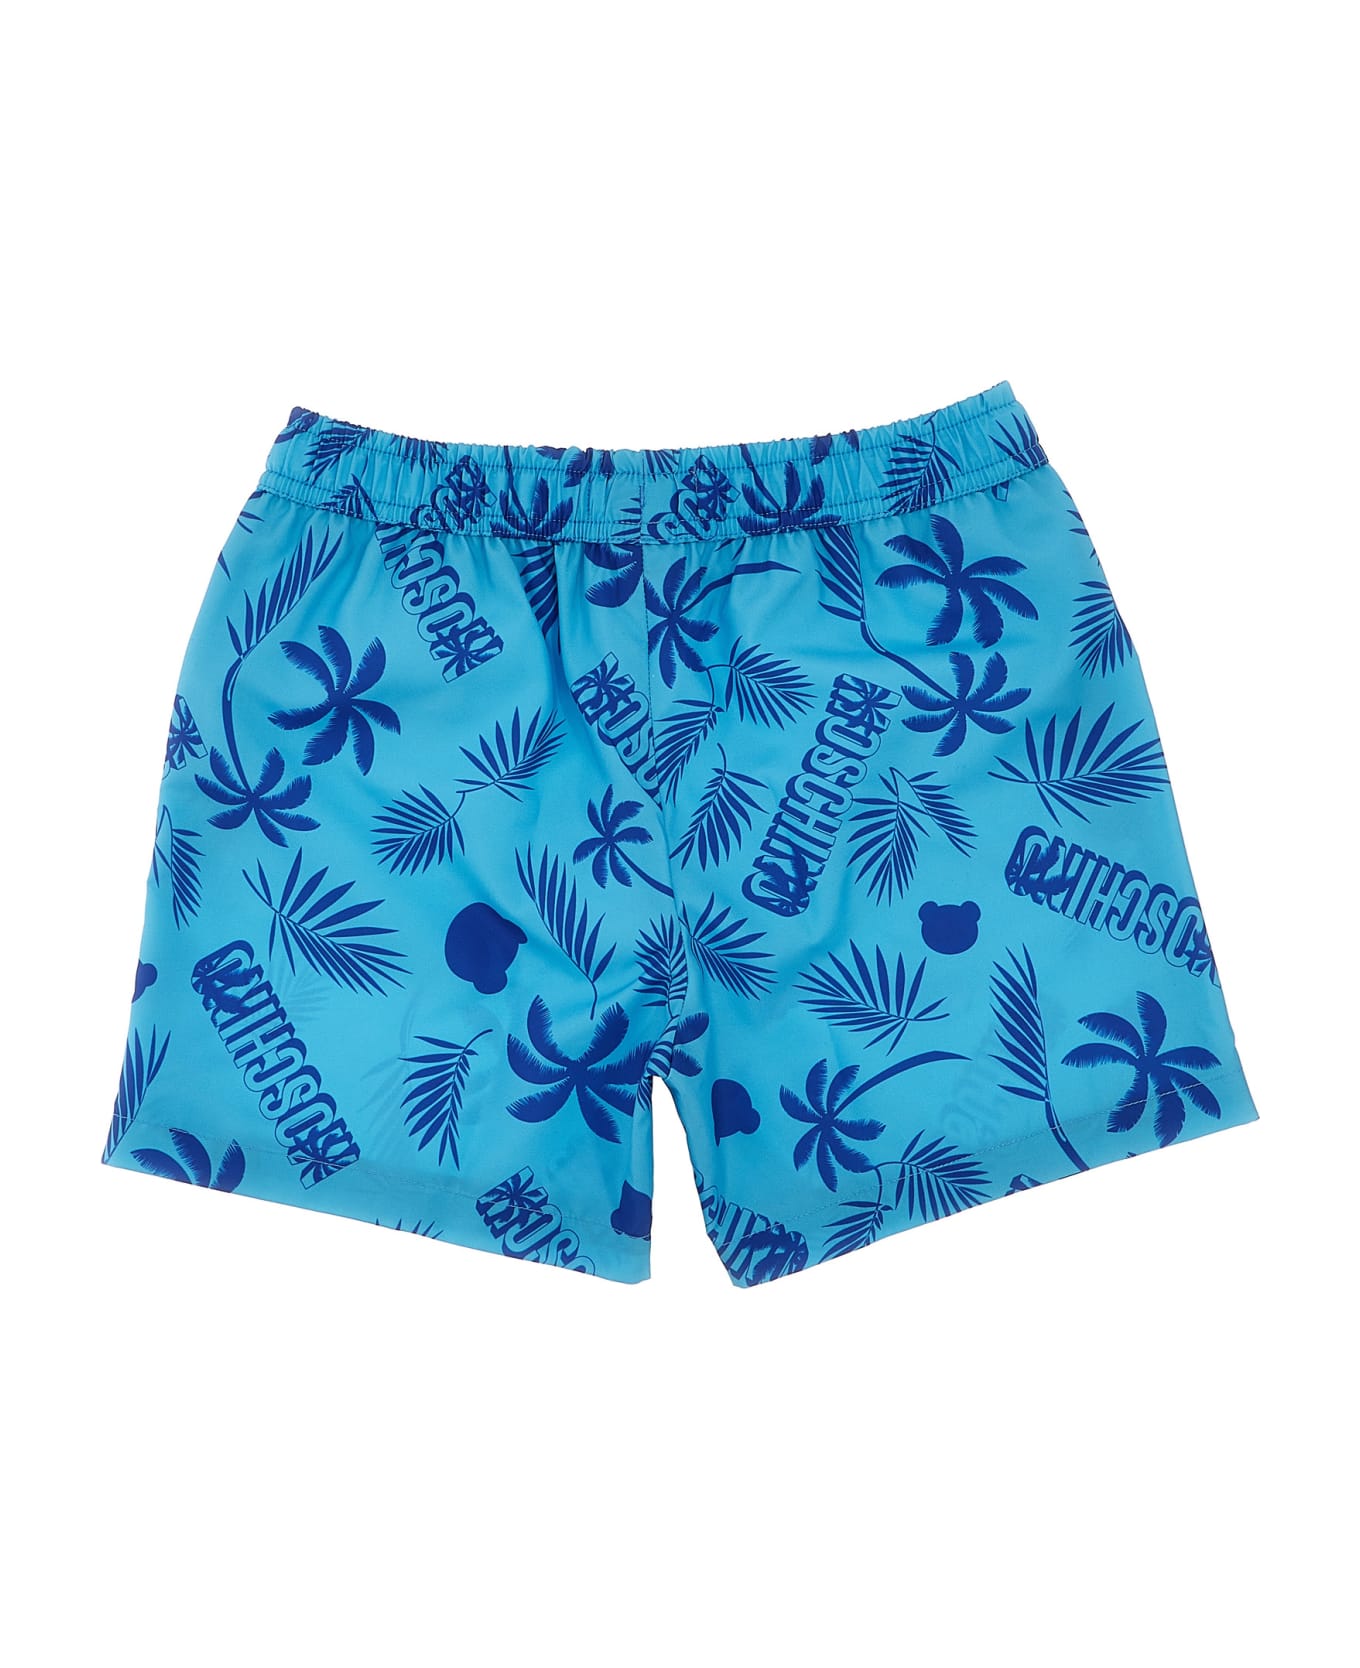 Moschino All Over Print Swimsuit - Light Blue